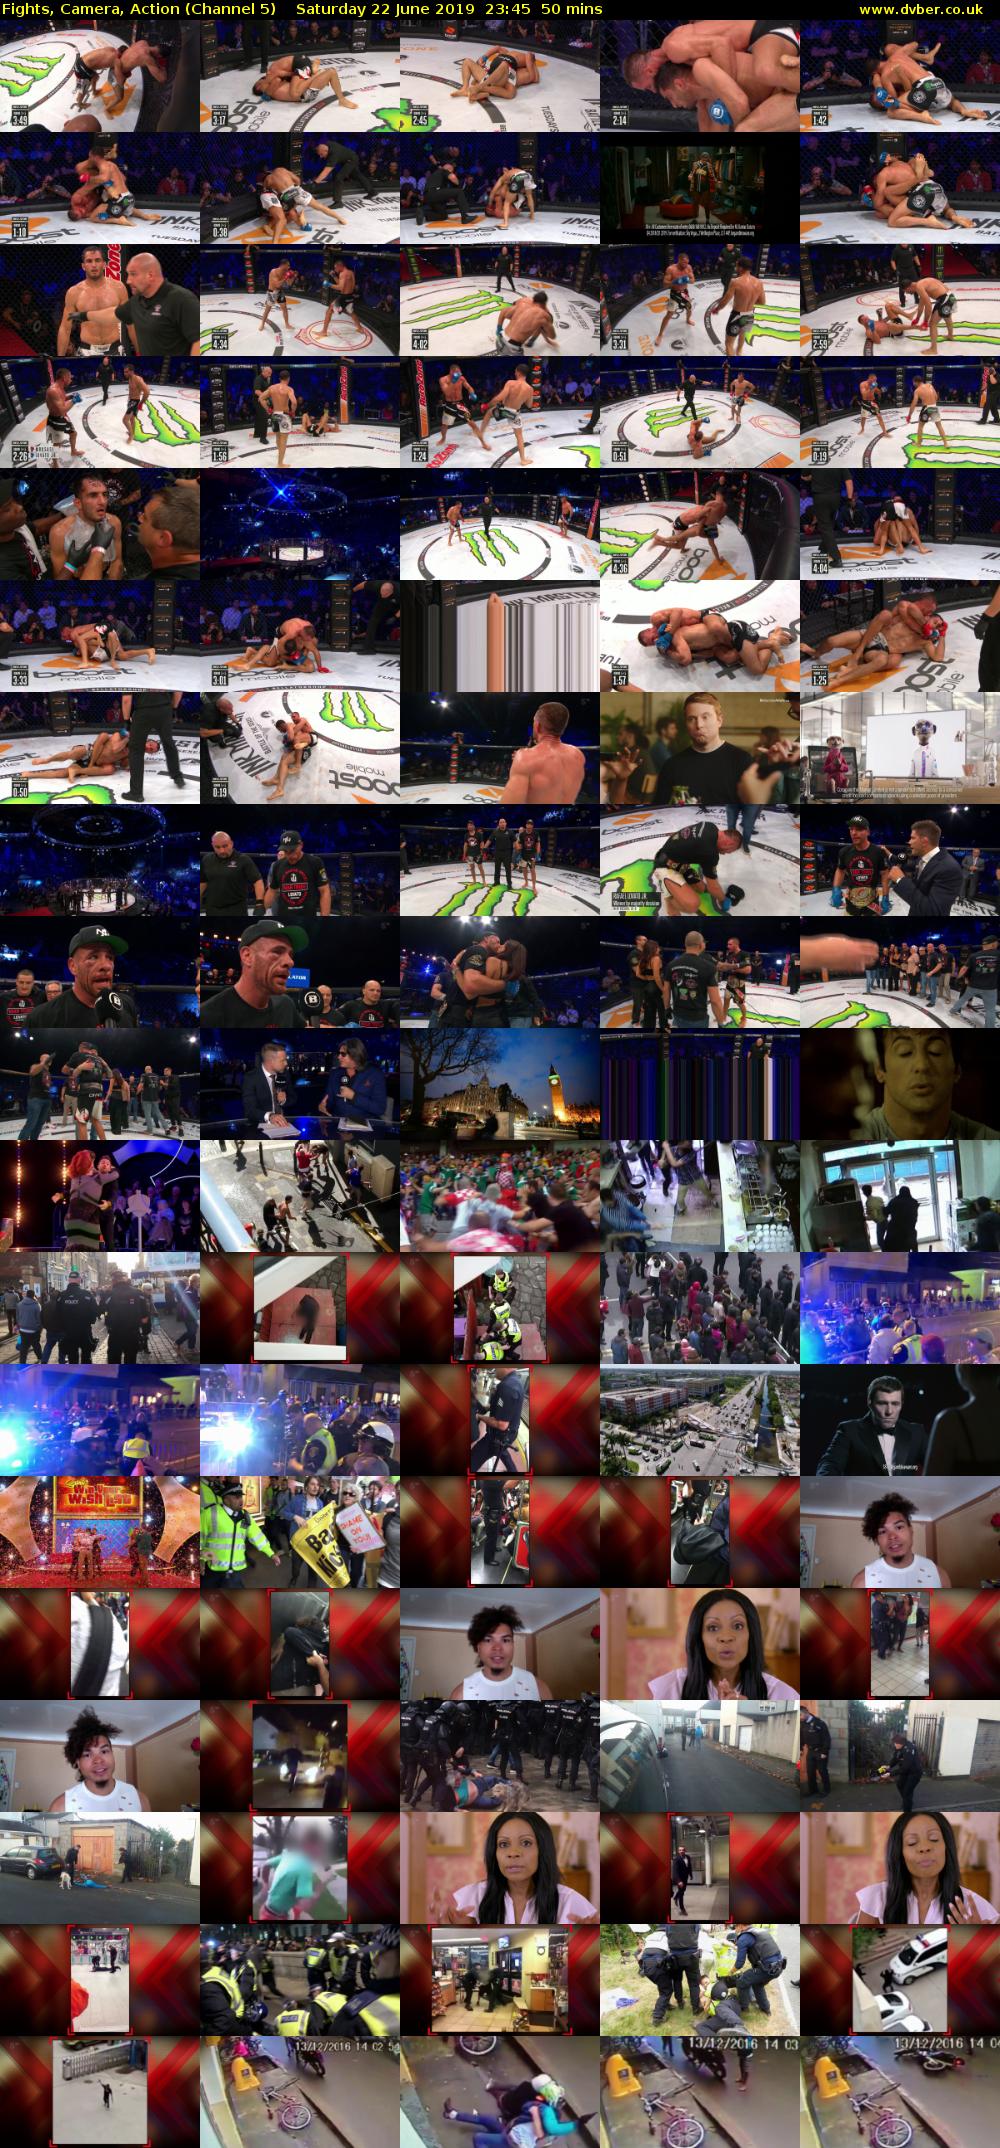 Fights, Camera, Action (Channel 5) Saturday 22 June 2019 23:45 - 00:35